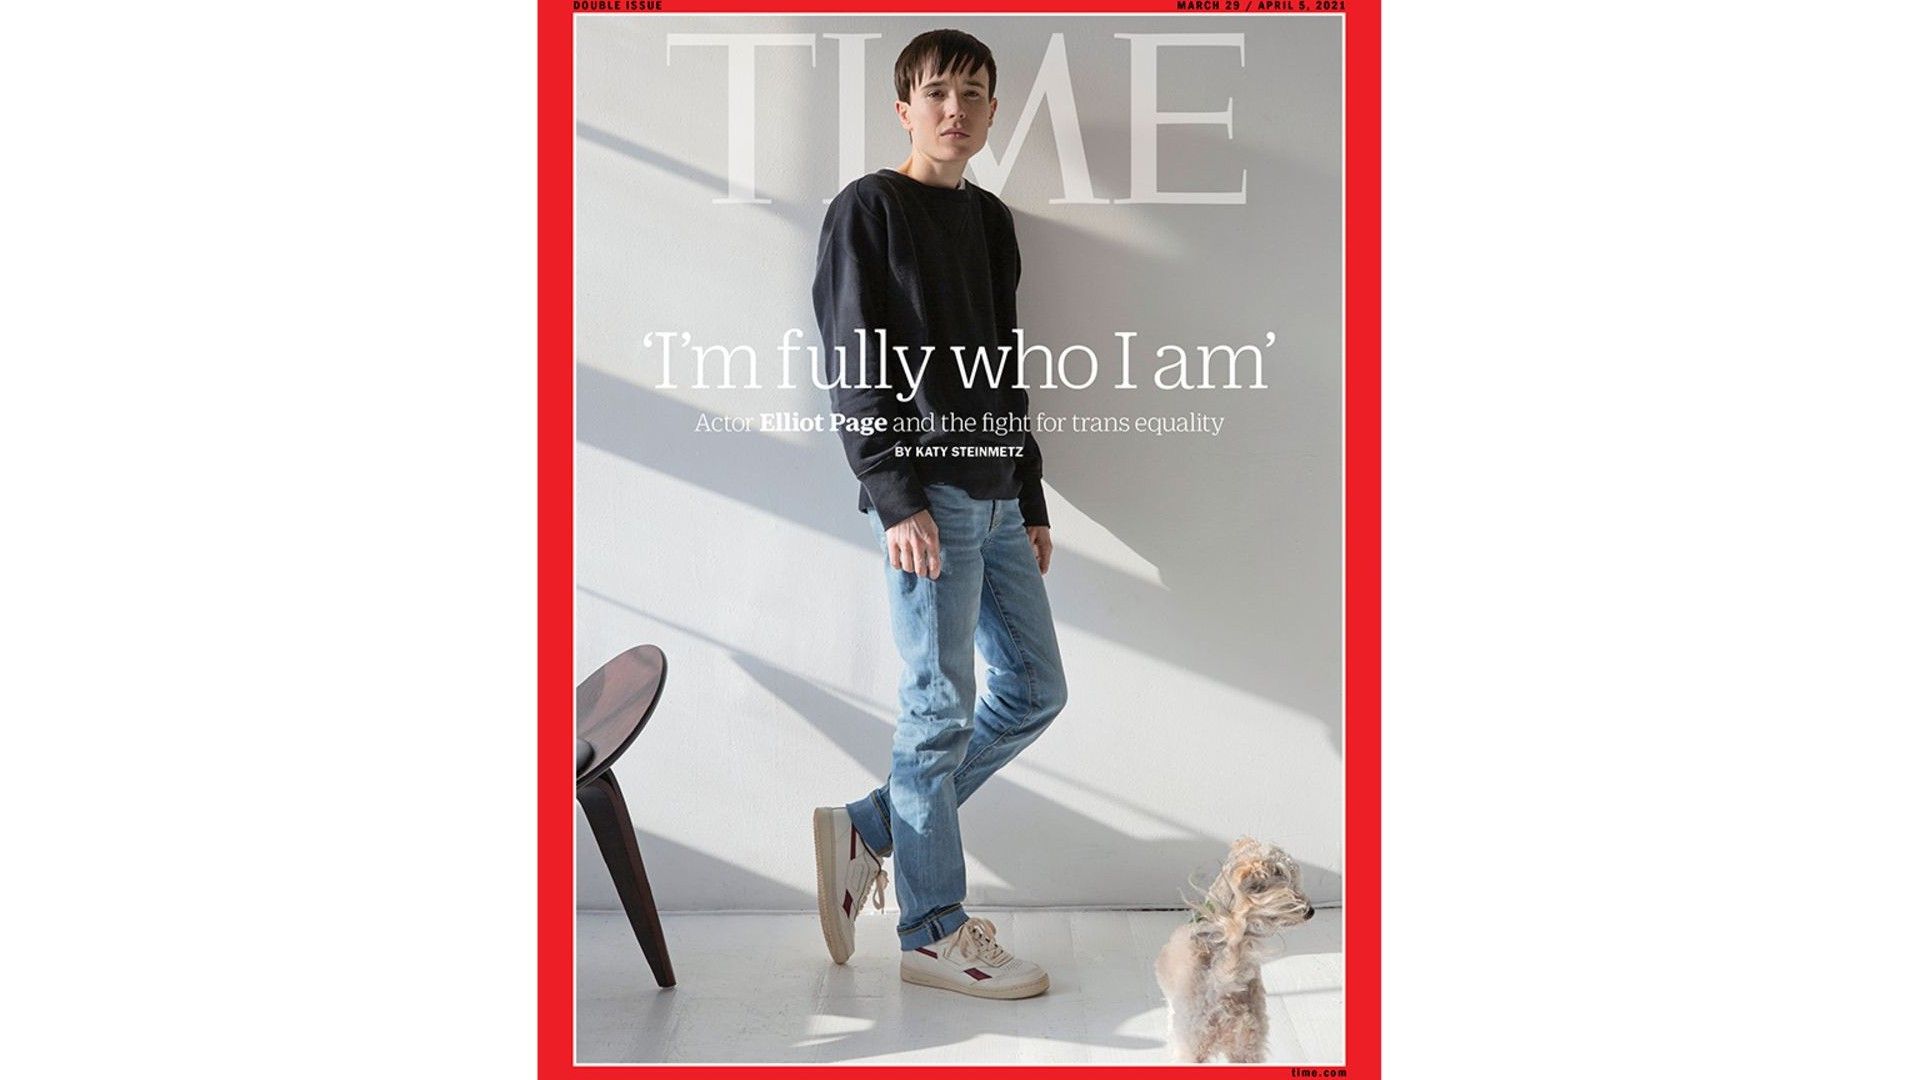 Elliot Page on the cover of Time magazine